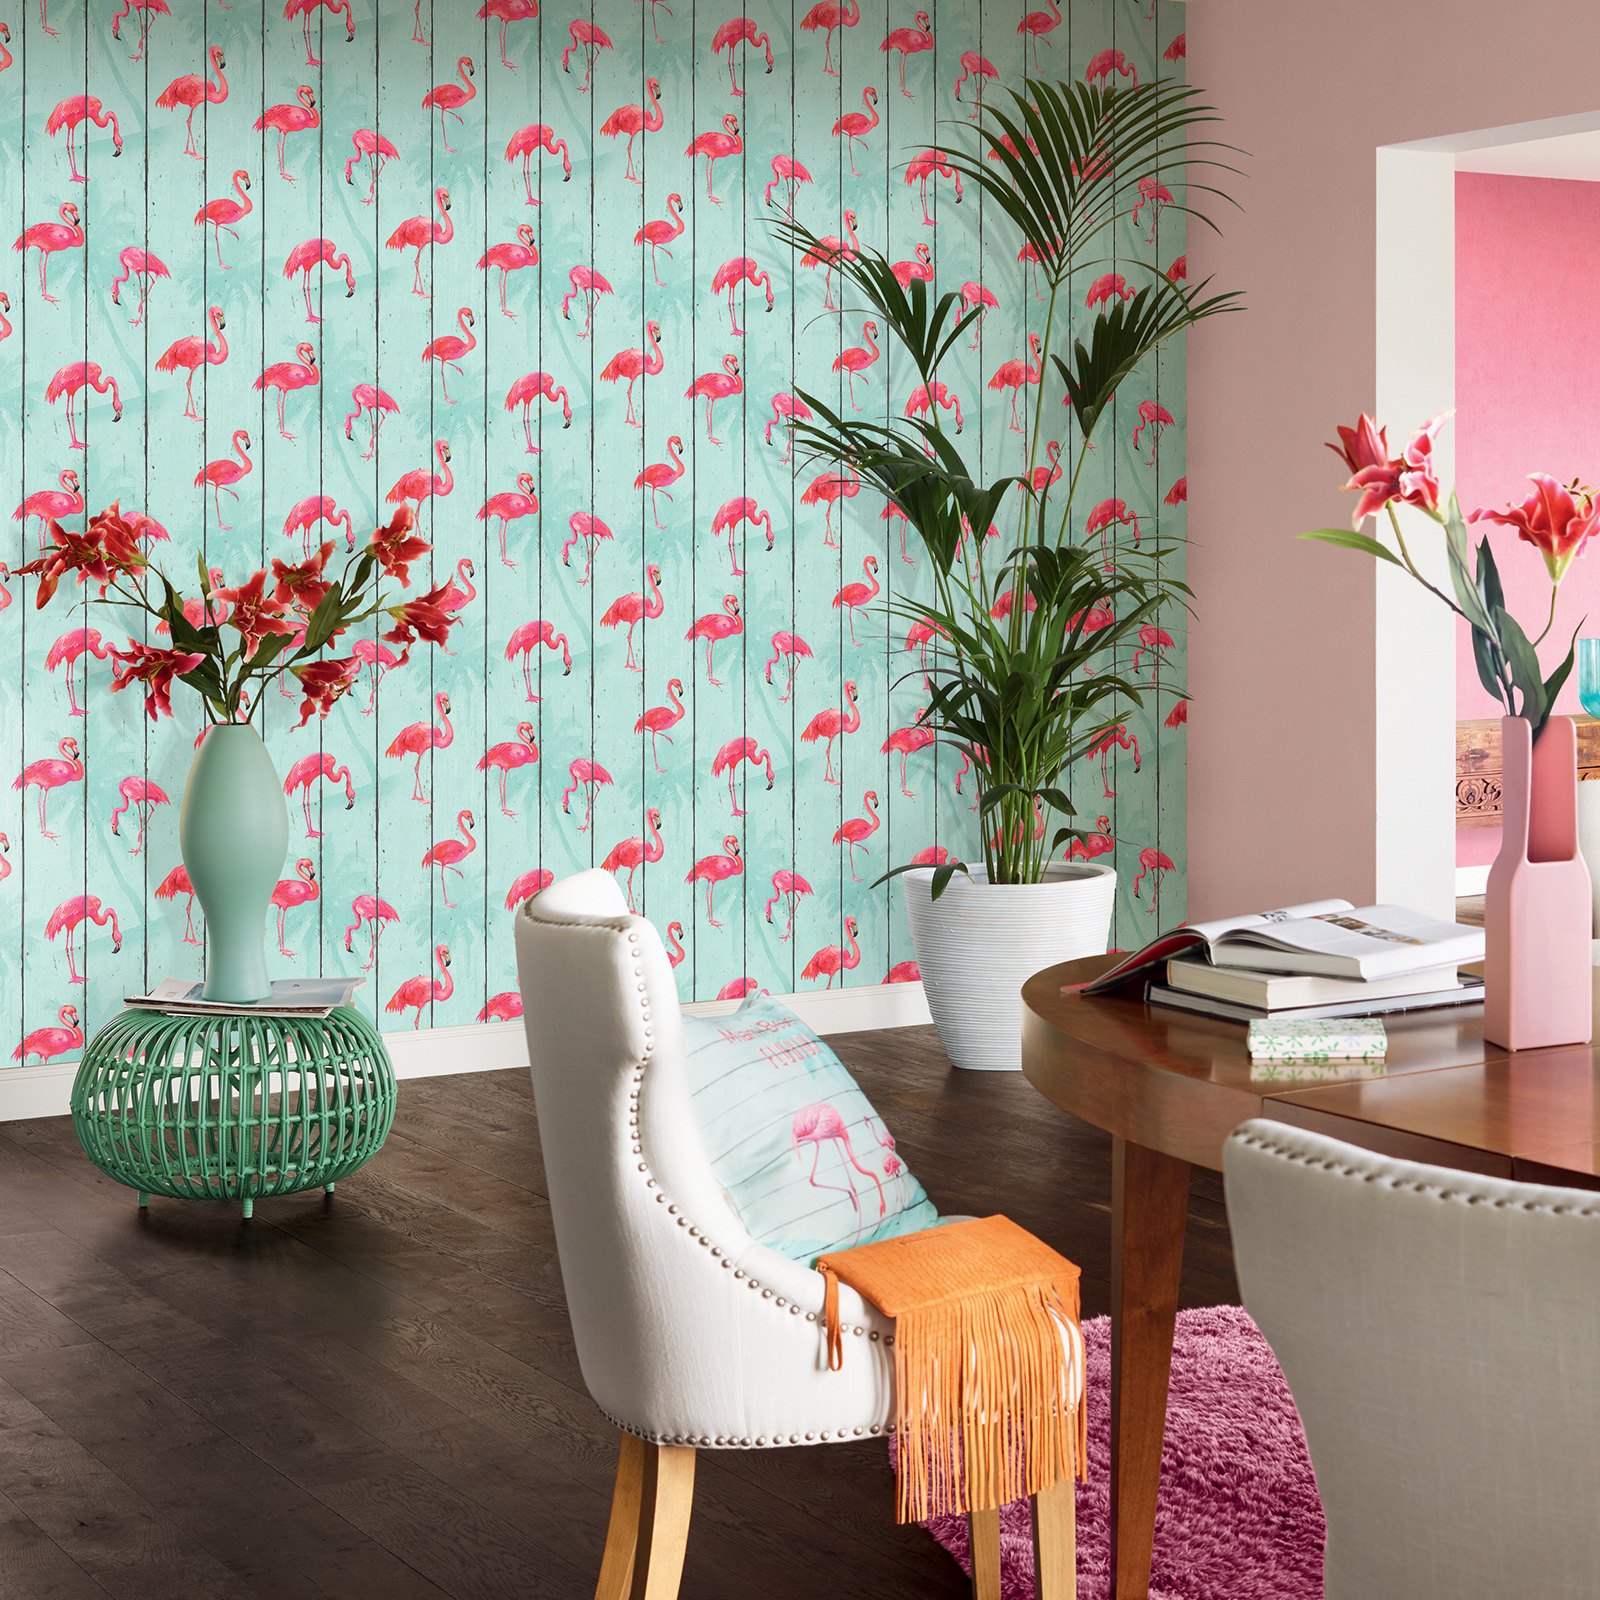 6 Reasons to Try Paste the Wall Wallpaper